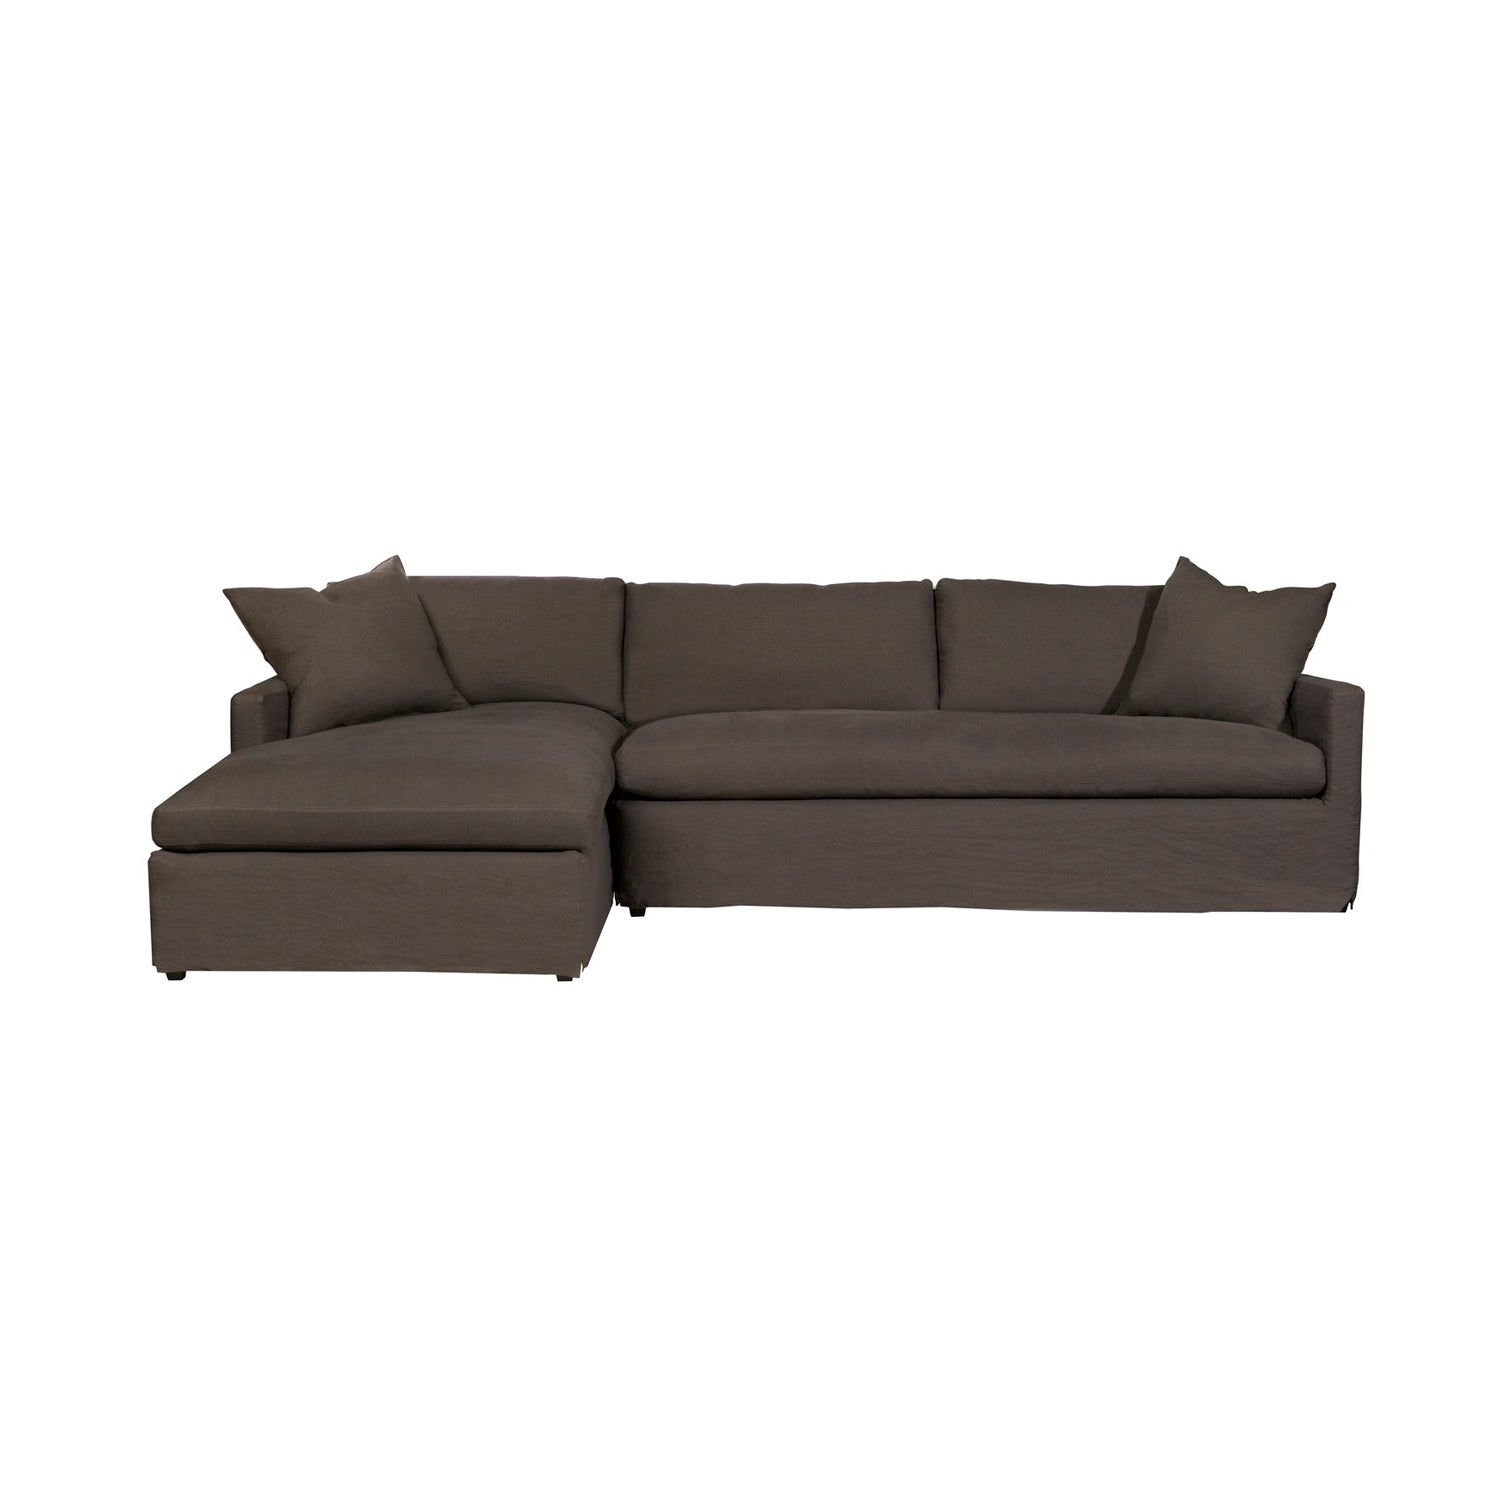 LOUIS 2PC SECTIONAL